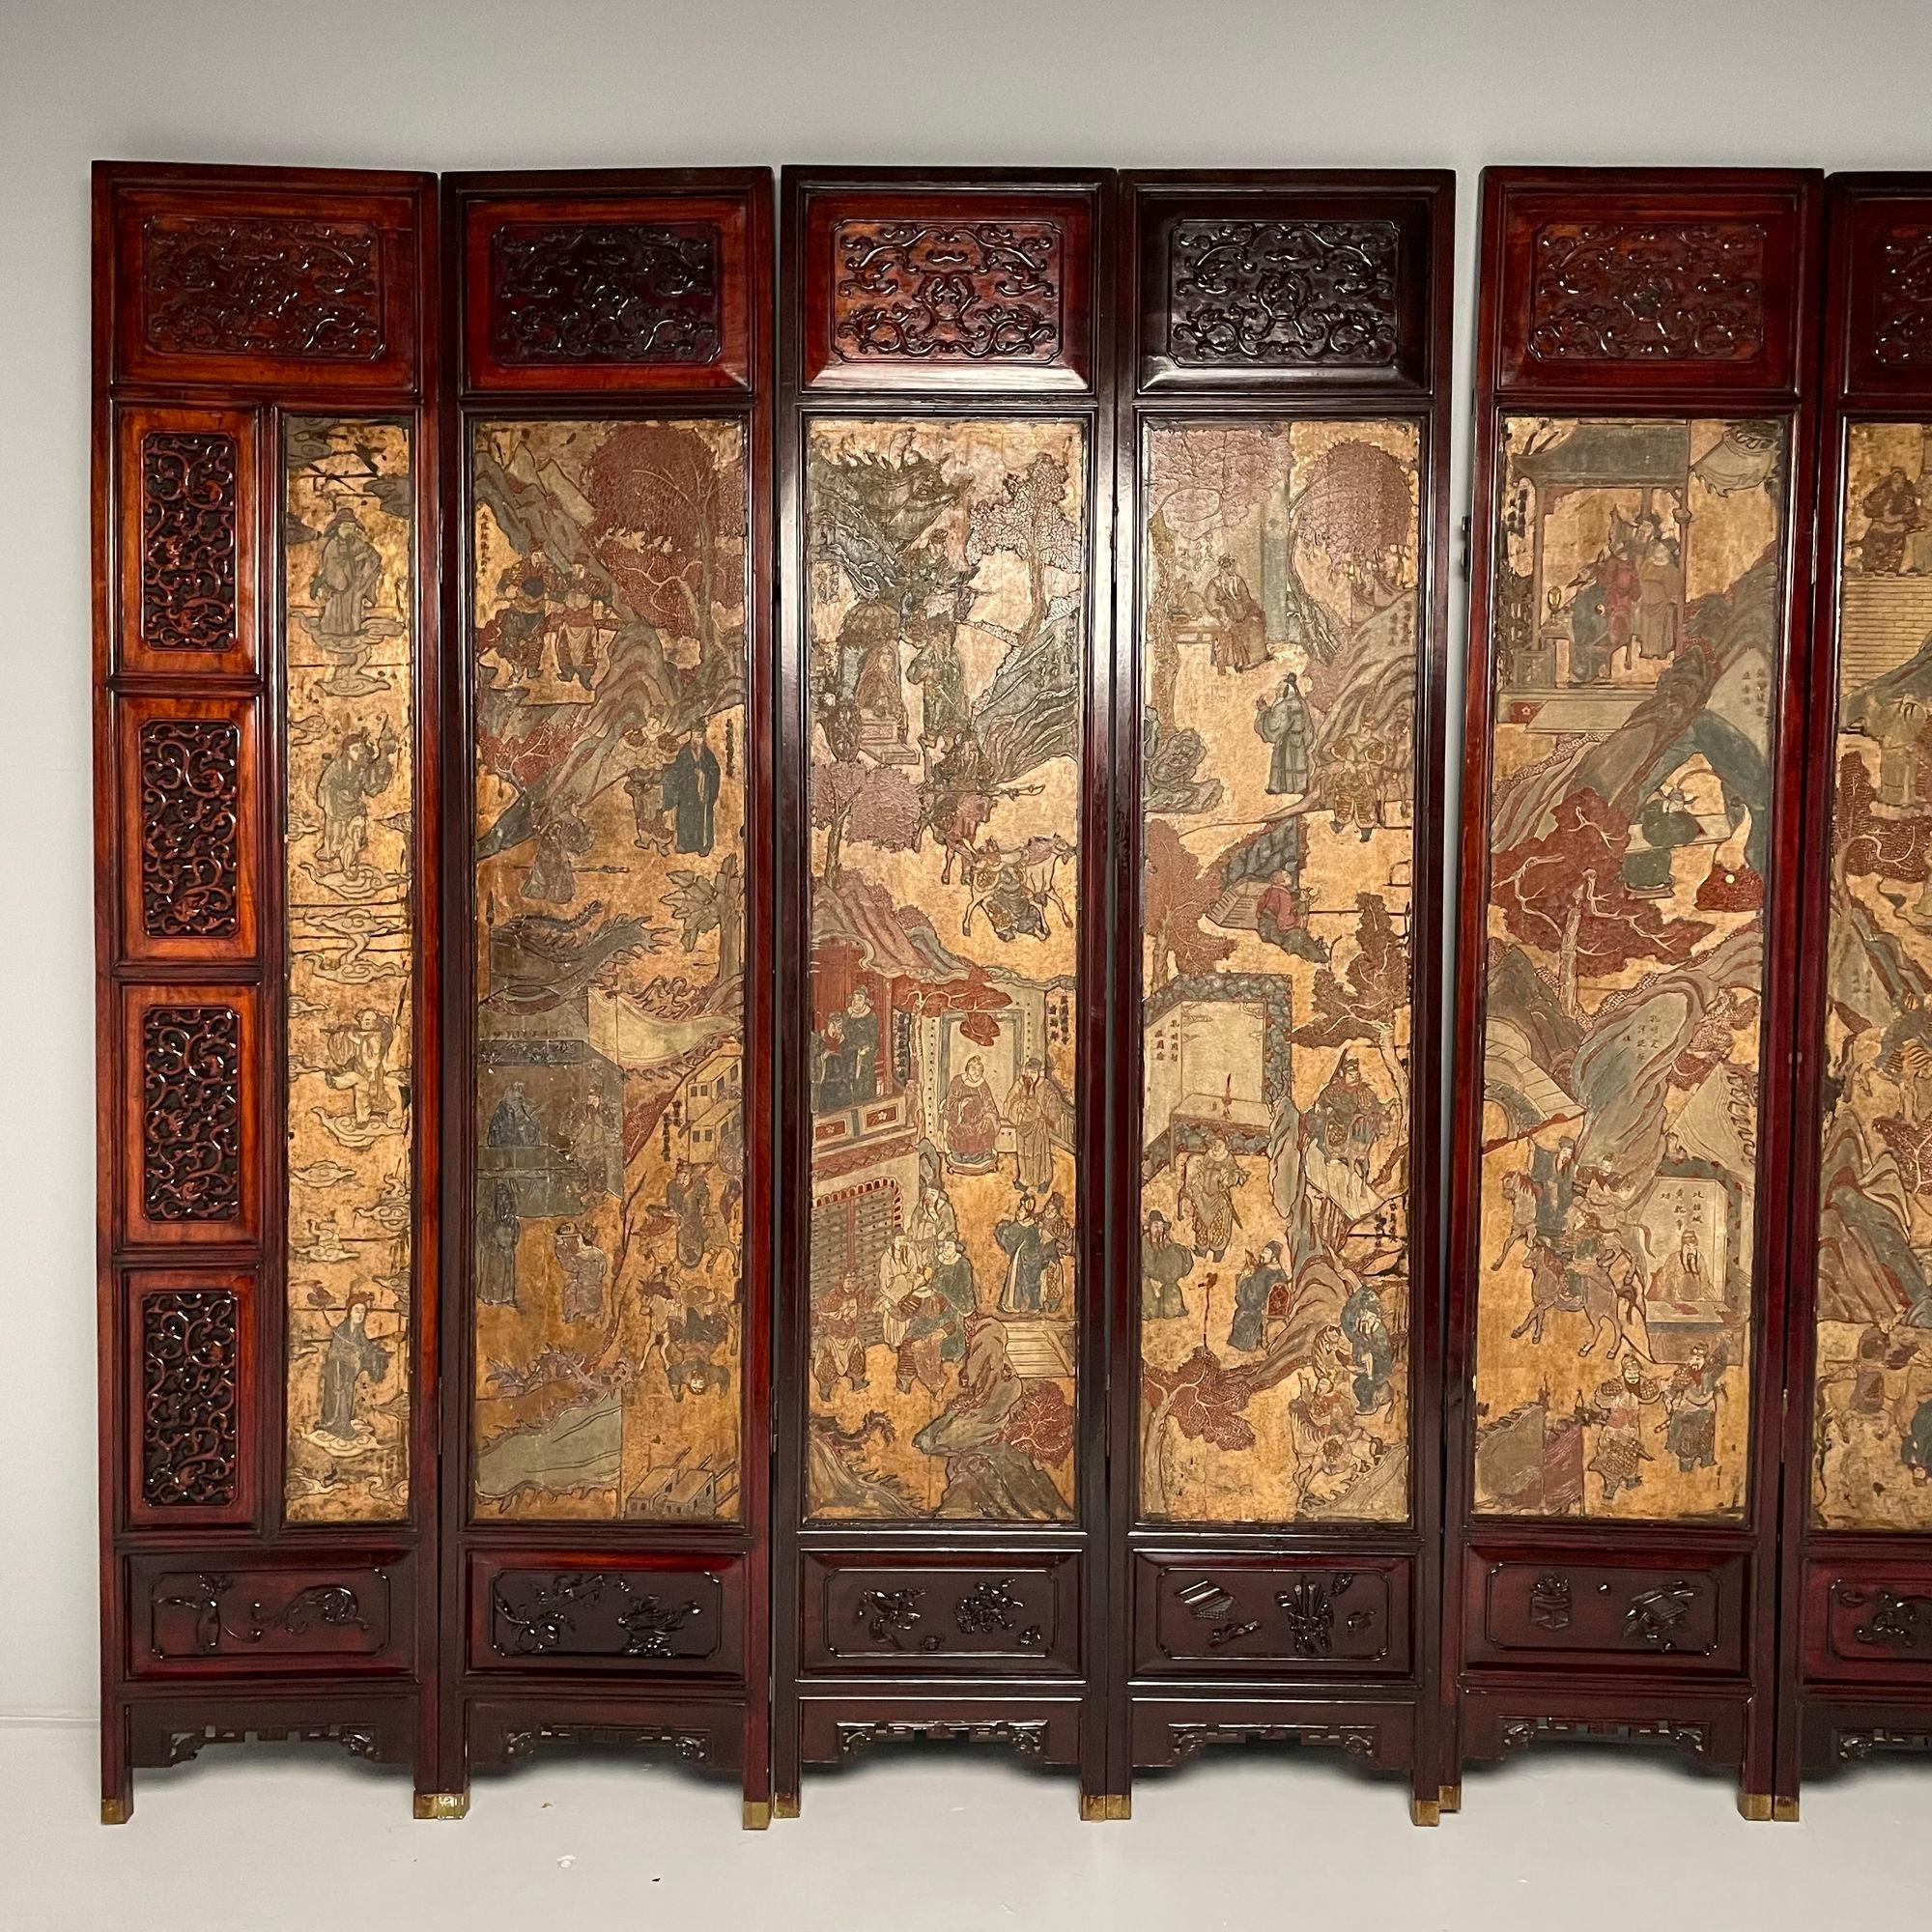 Unusual Eight Panel Chinese Coromandel Screen circa 1700-1800 with Carved Frame For Sale 3